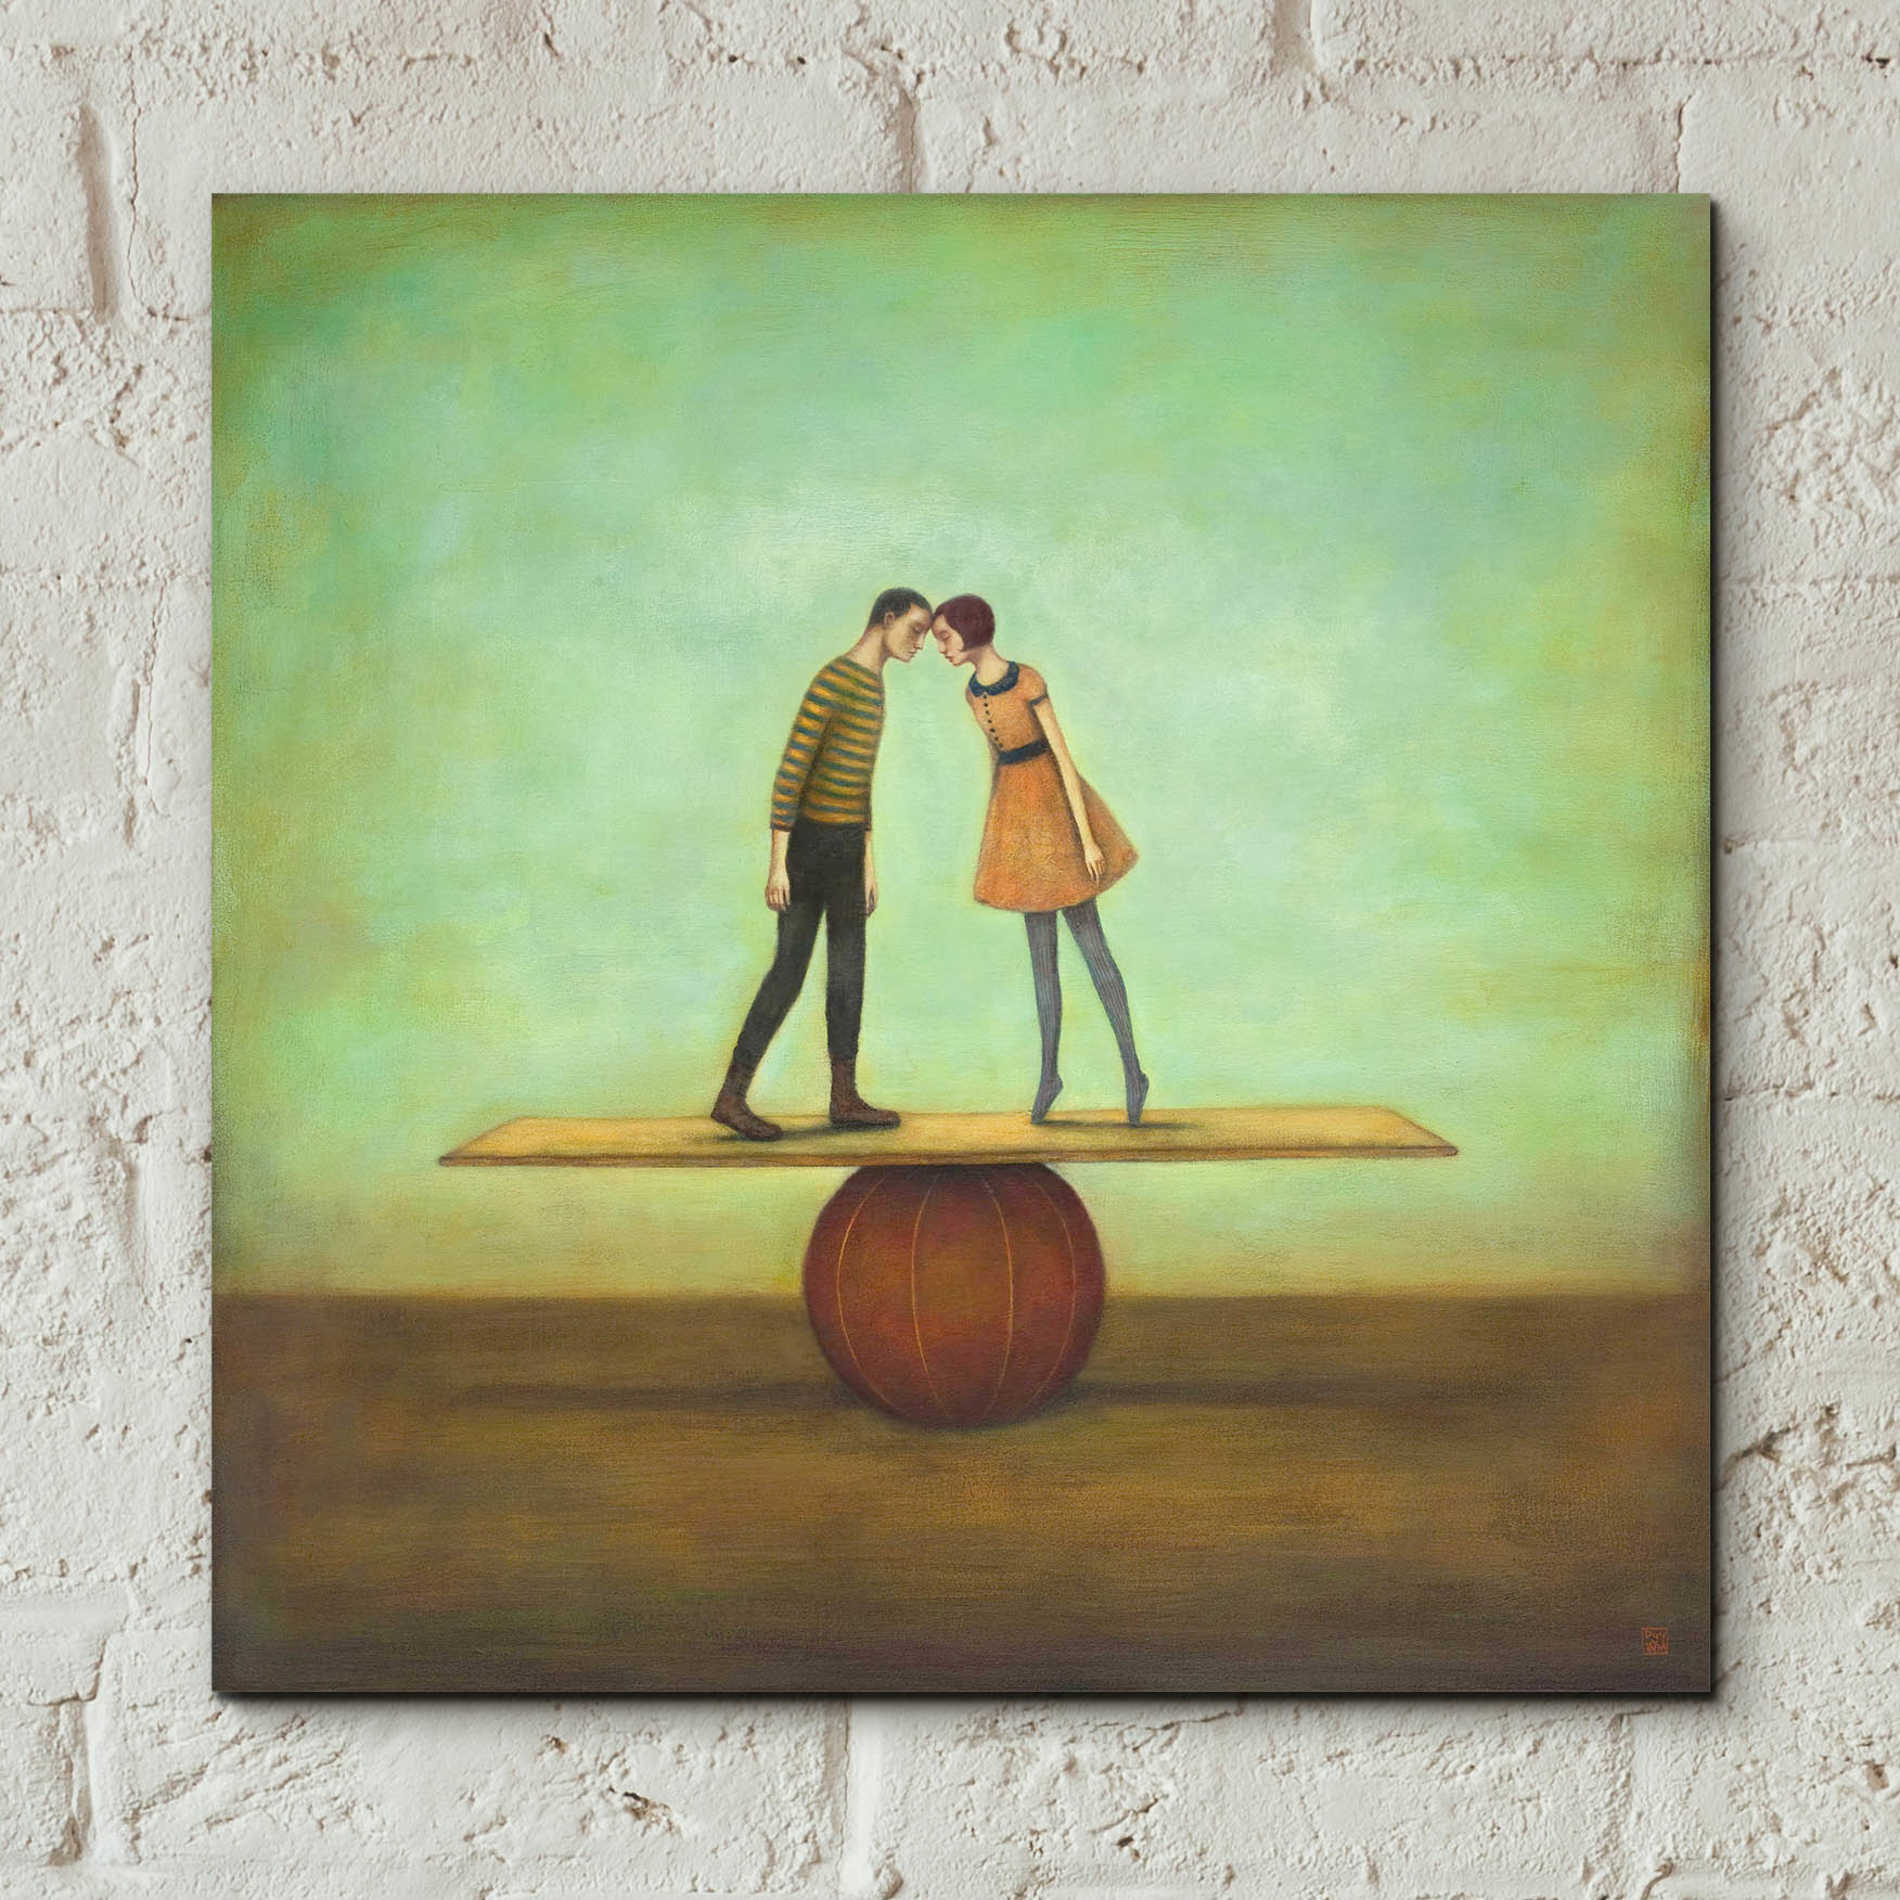 Epic Art 'Finding Equilibrium' by Duy Huynh, Acrylic Glass Wall Art,12x12